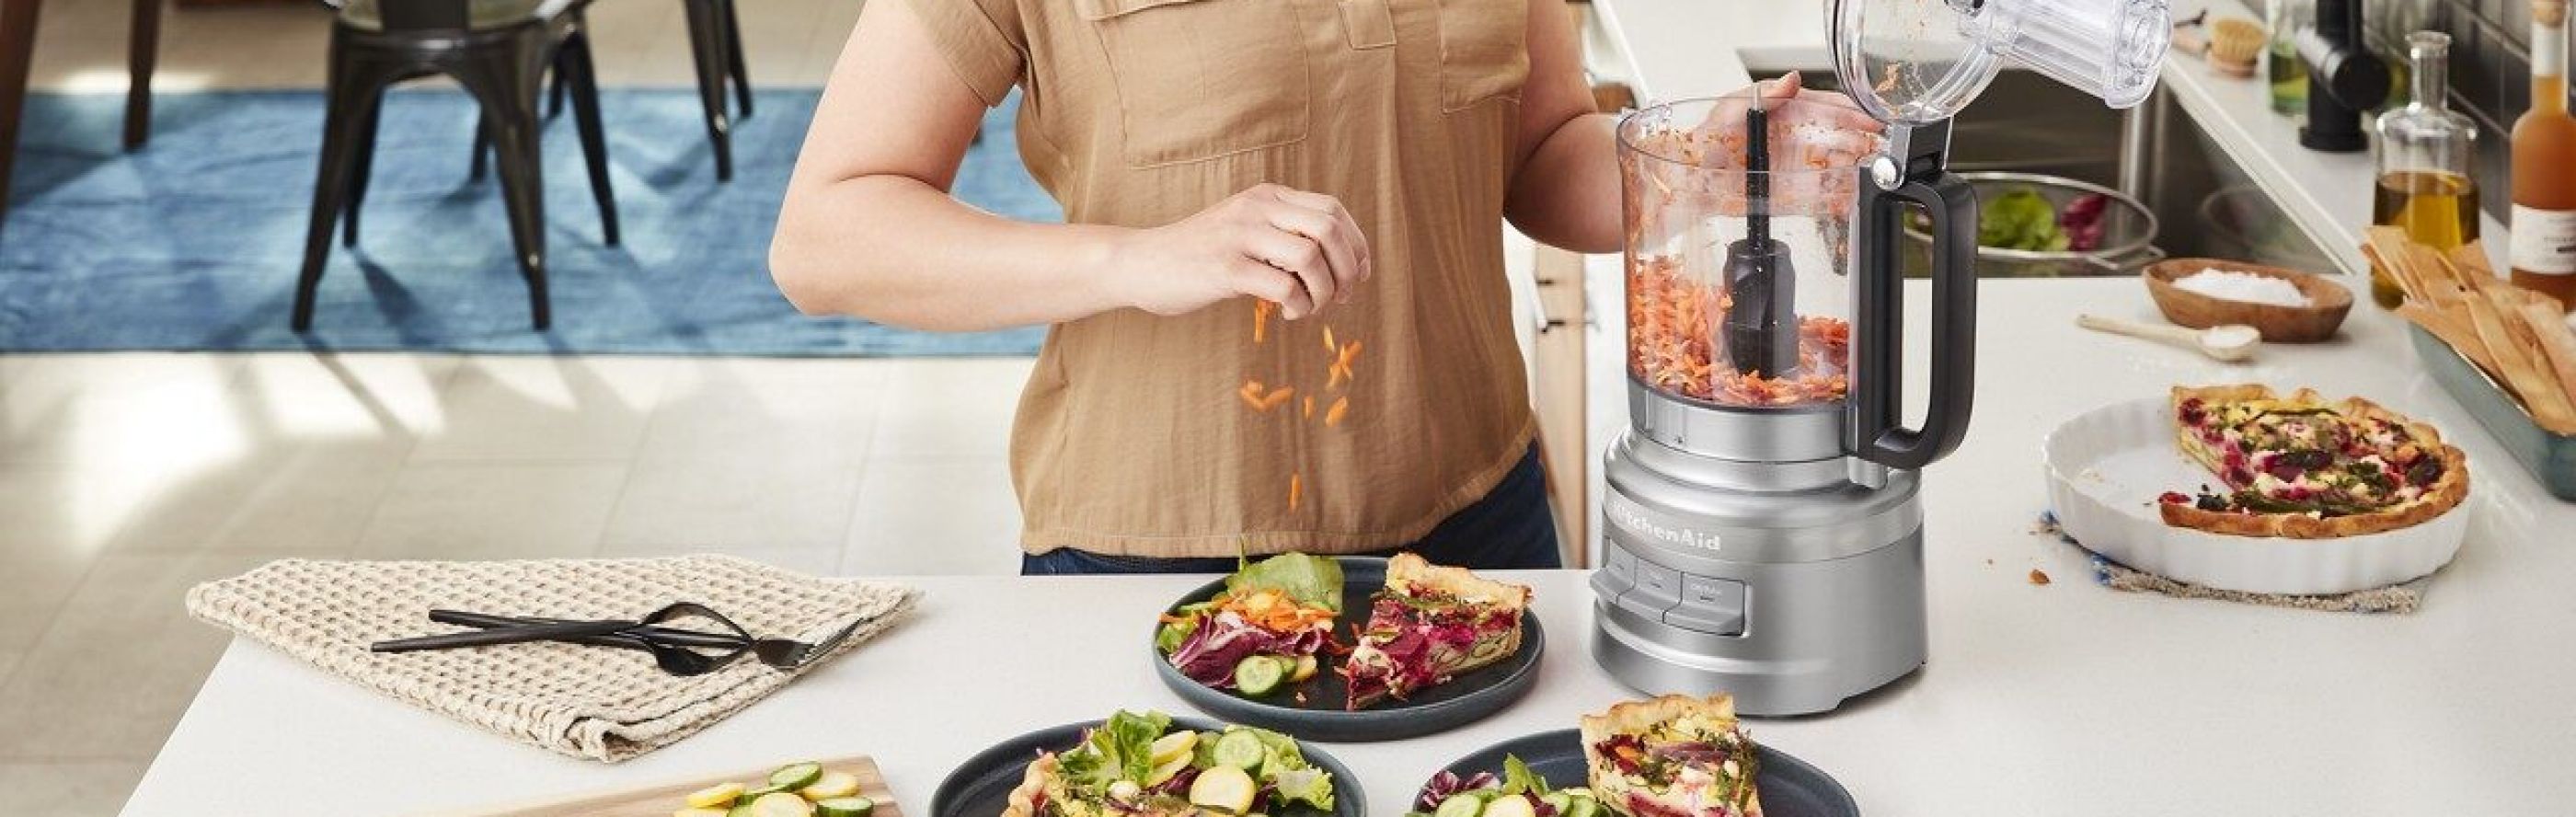 Woman shredding vegetables for a salad with a KitchenAid® food processor